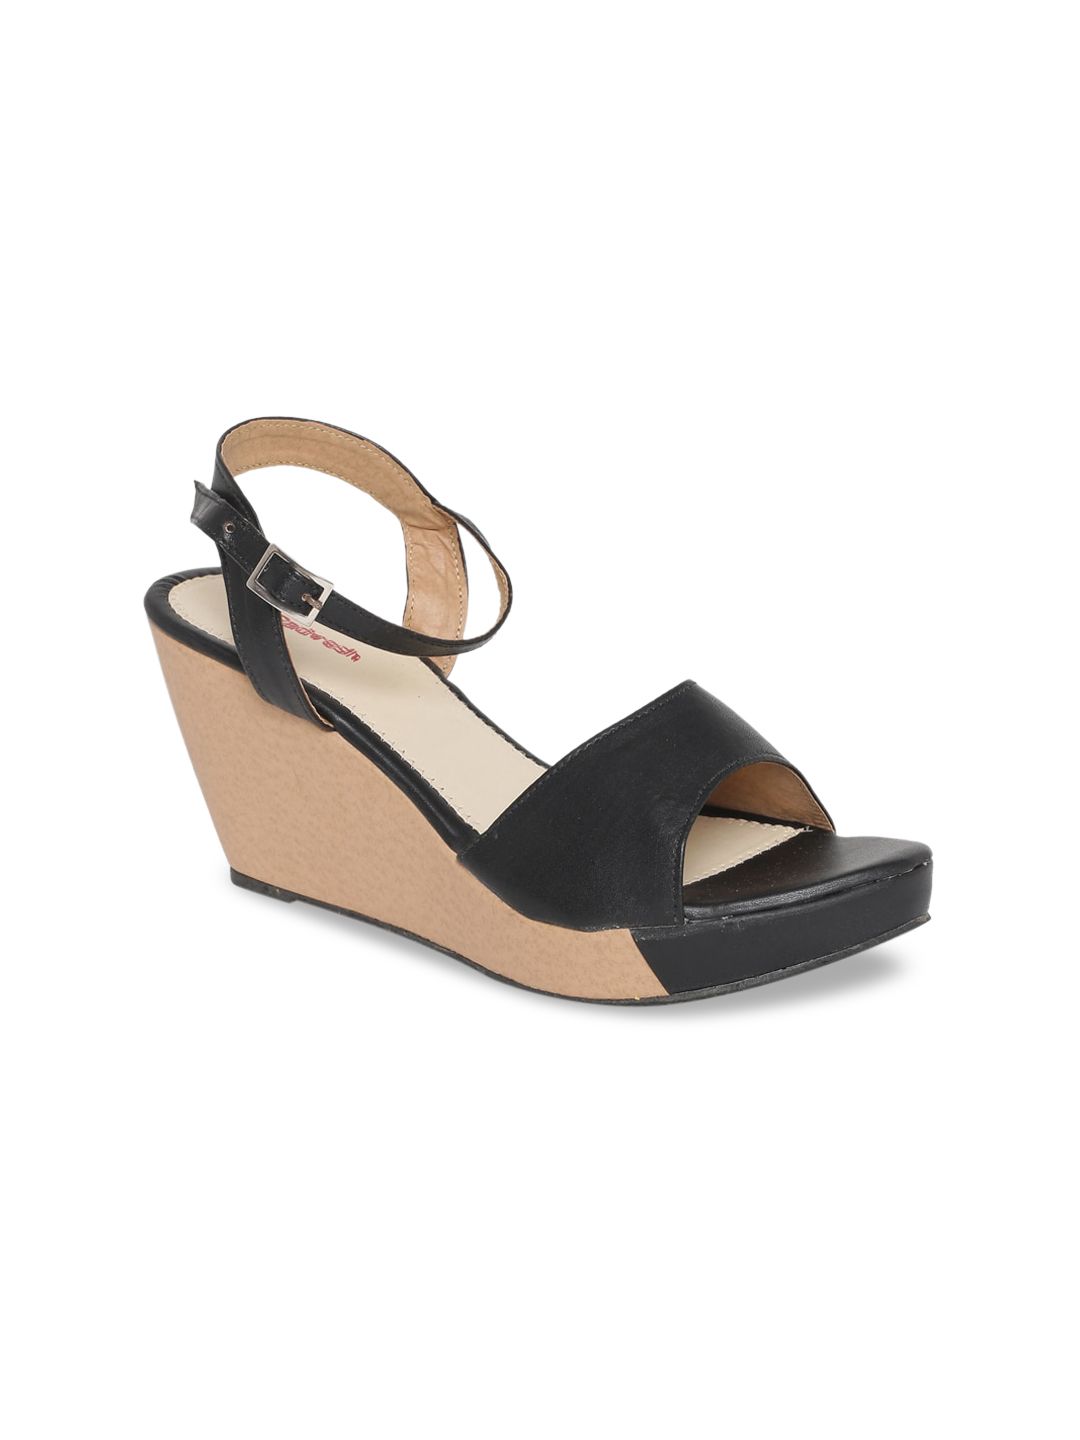 Padvesh Women Black Solid Sandals Price in India